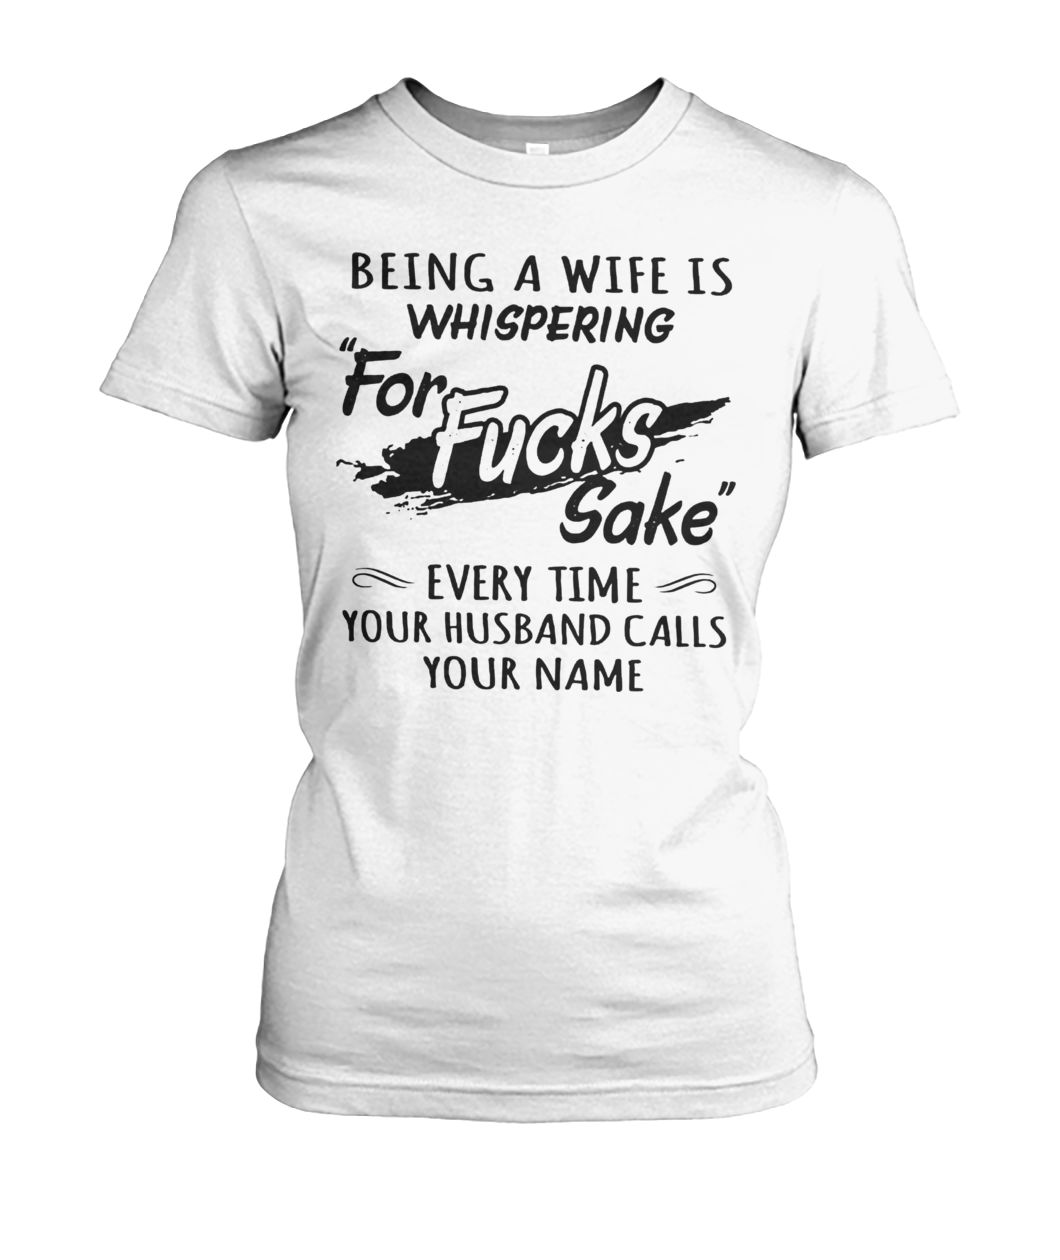 Being a wife is whispering for fucks sake every time your husband calls your name women's cew tee